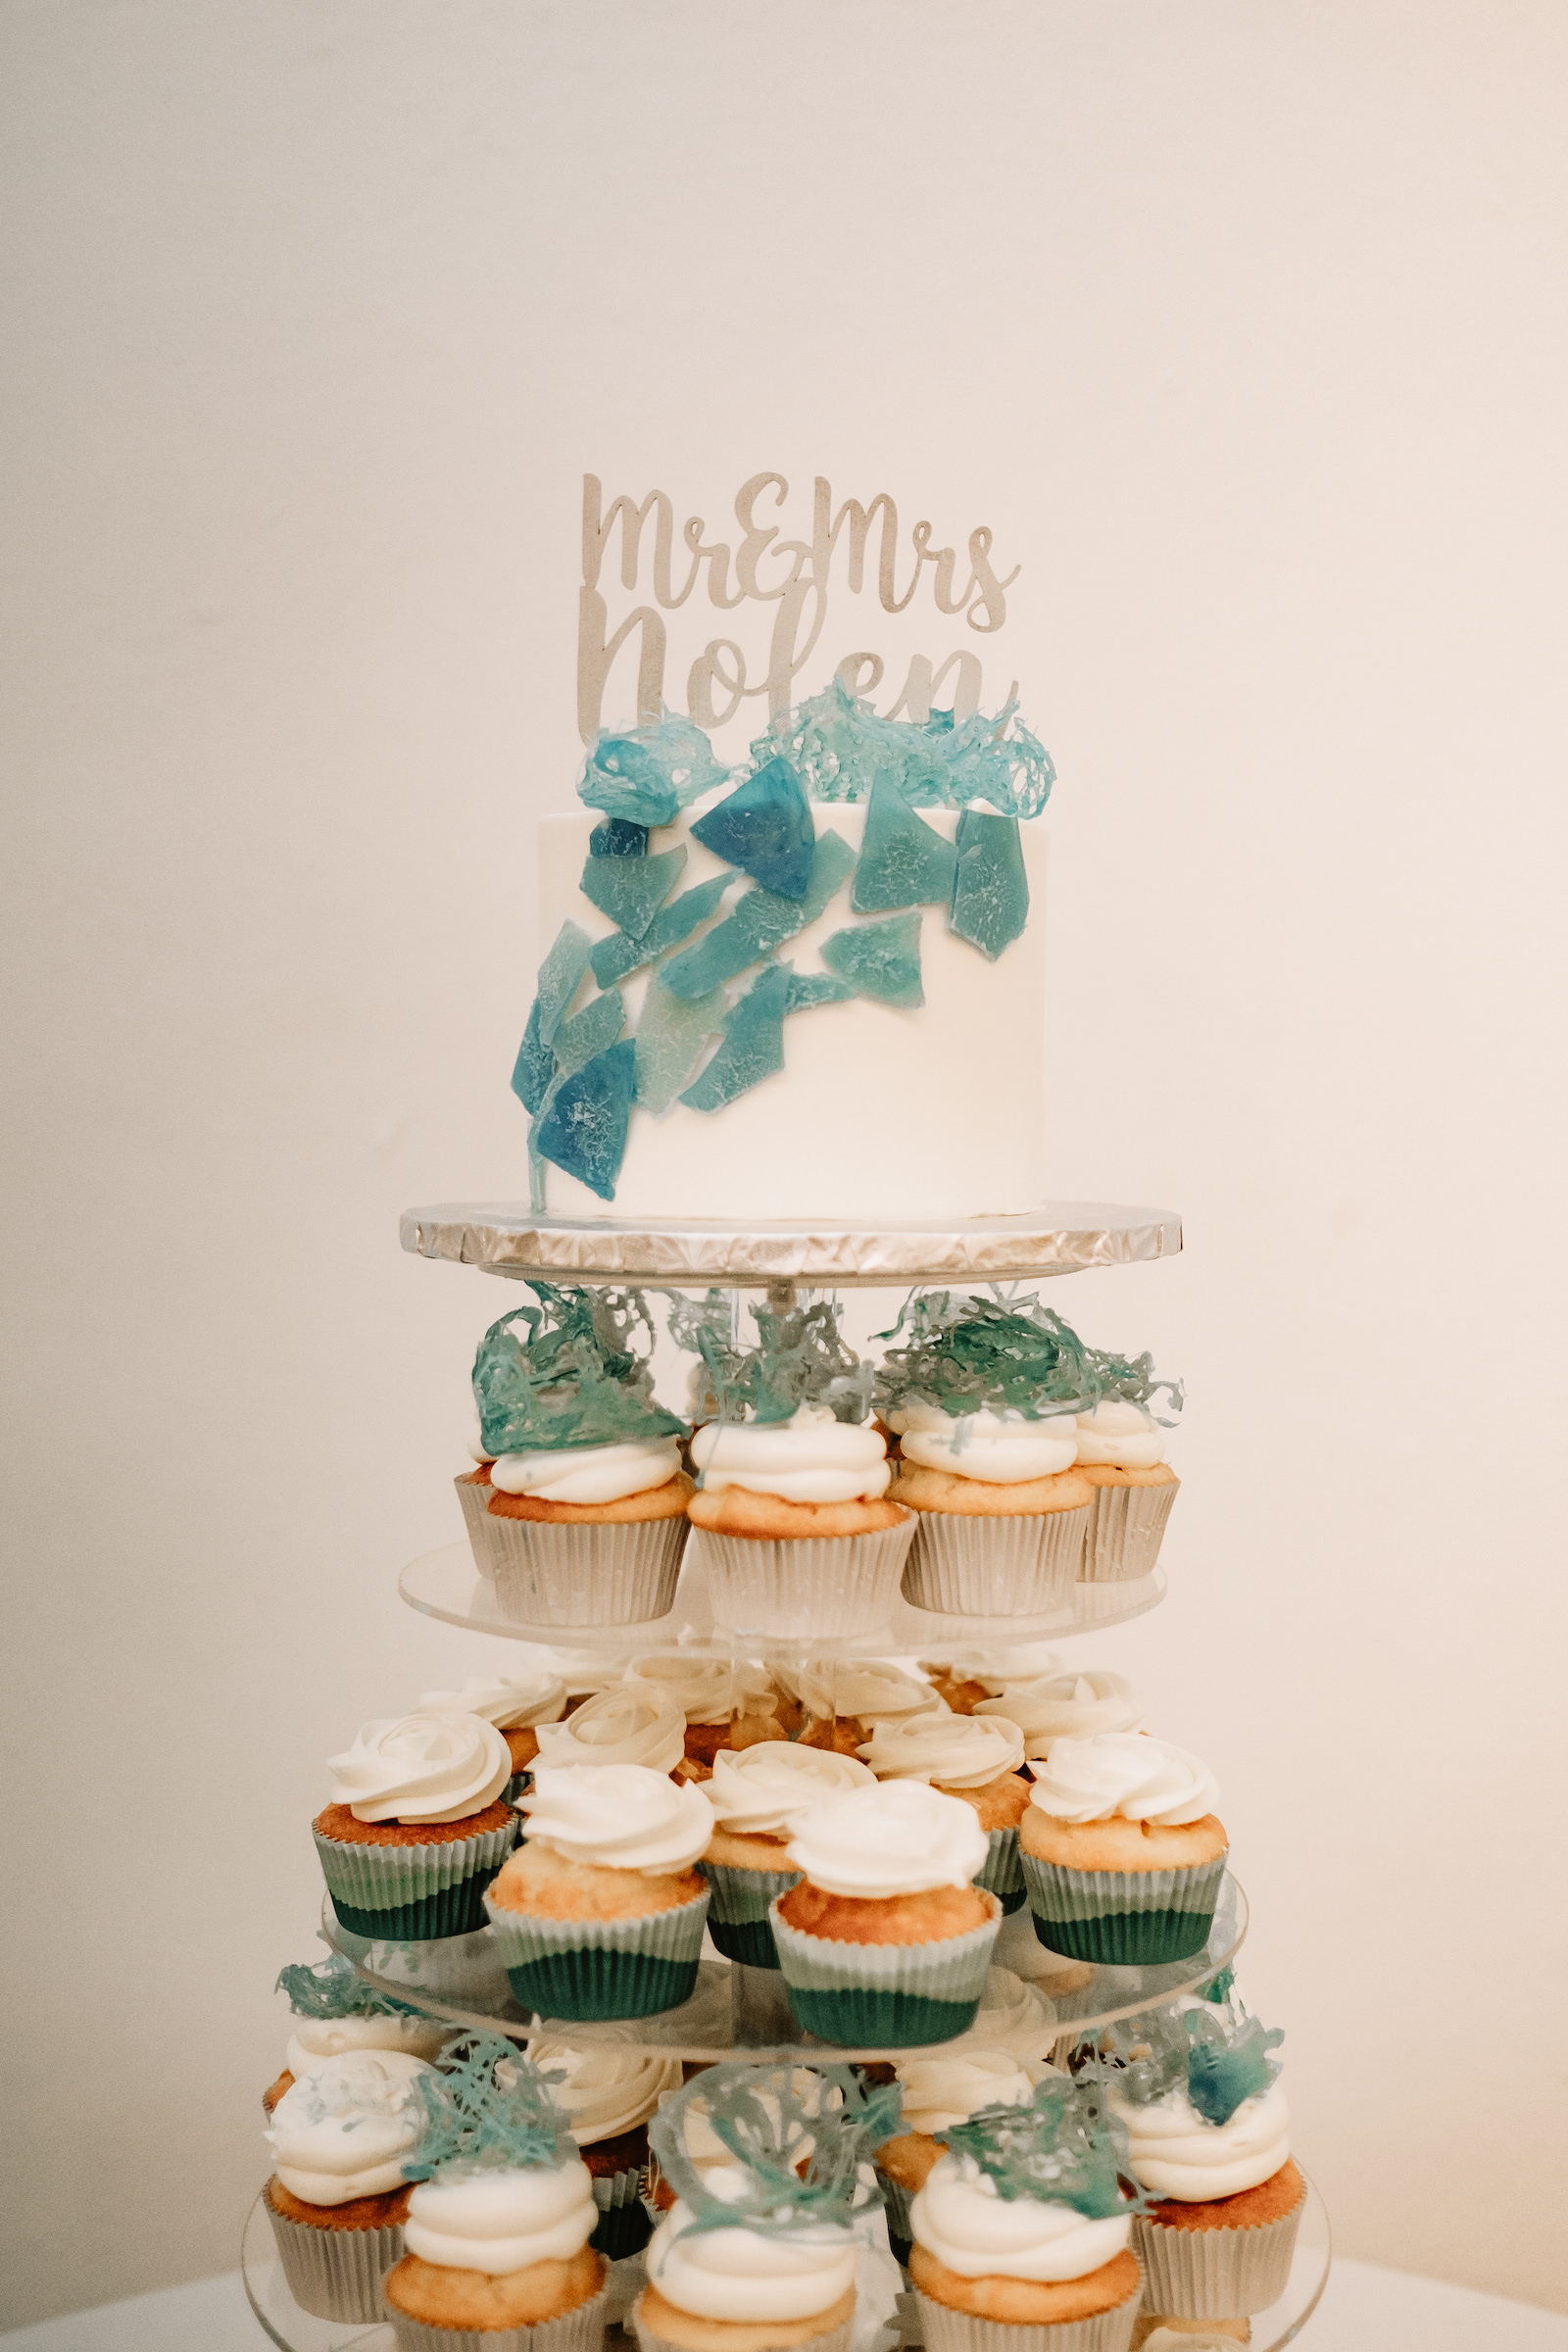 Coastal Clearwater Beach Wedding Cake Cupcake Tower with Sugar Sea Glass and Die Cut Name Cake Topper | The Artistic Whisk